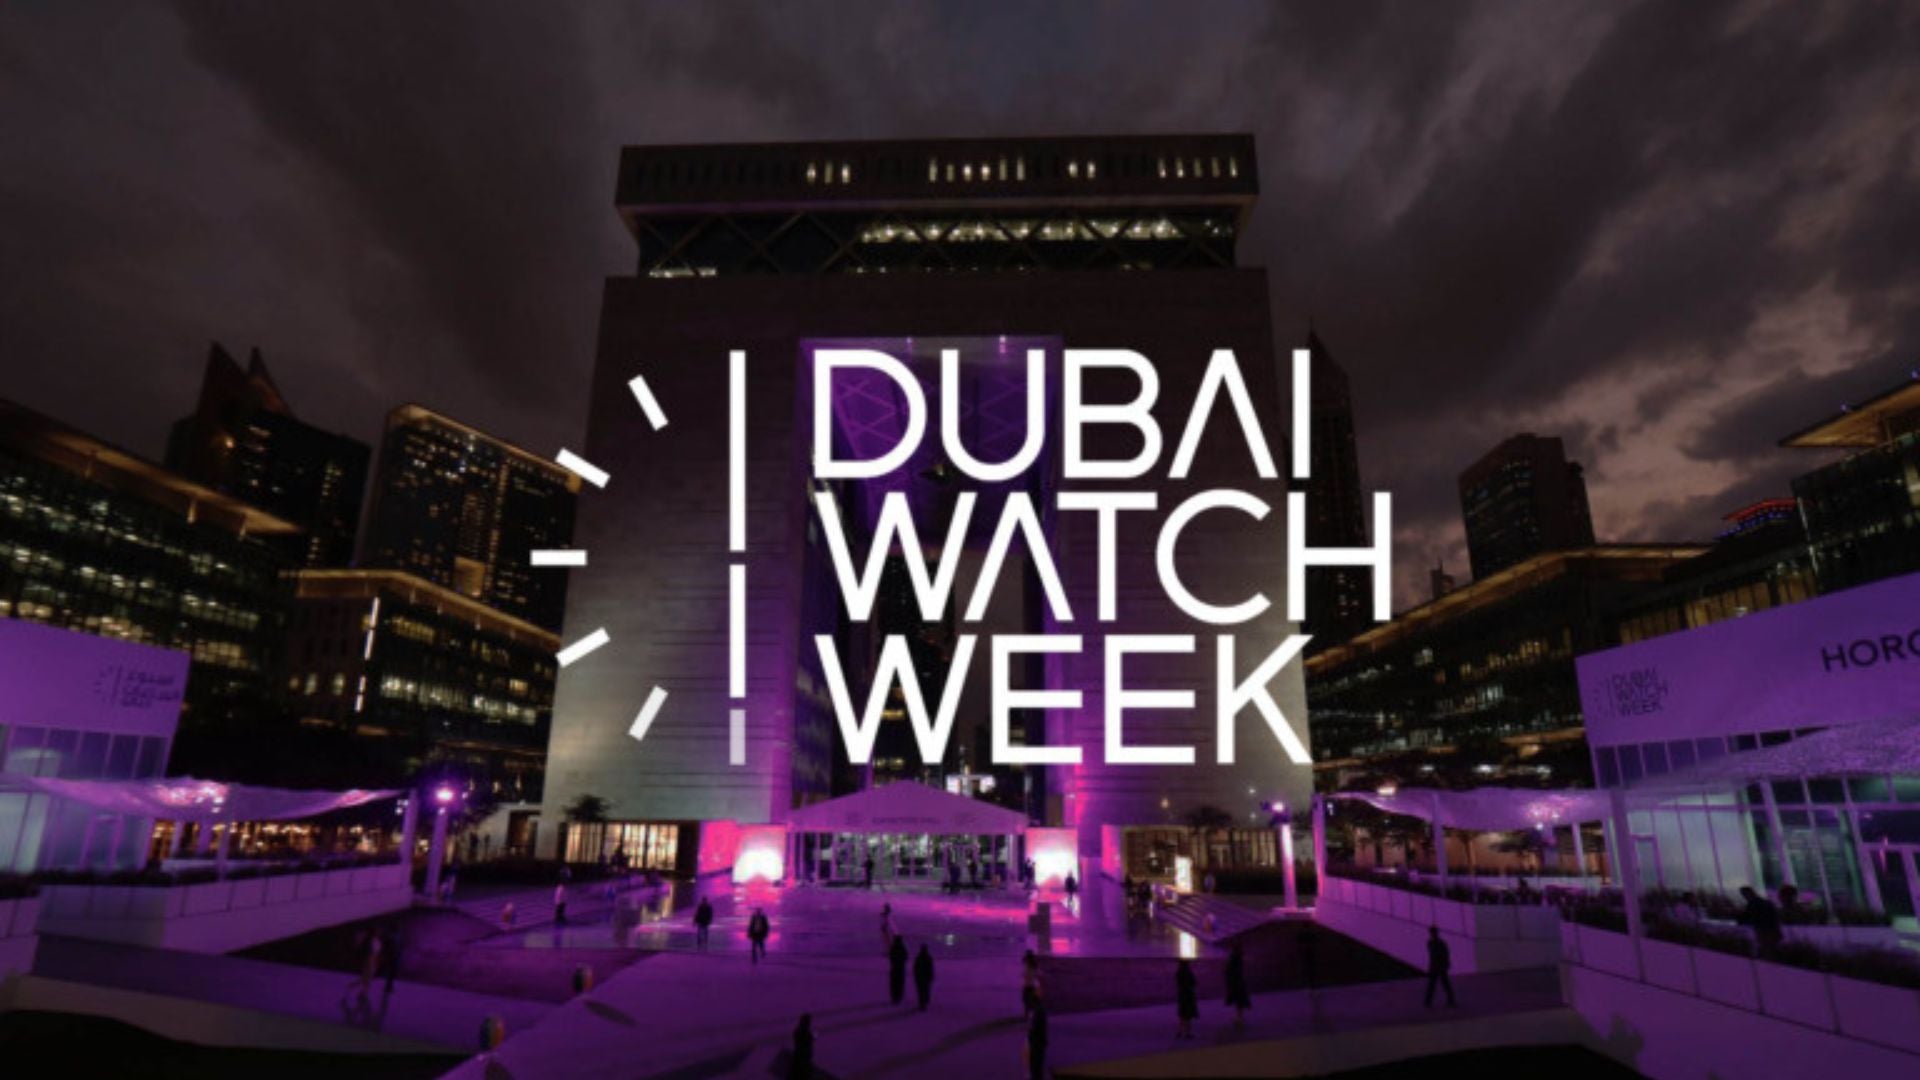 A BLOG TO WATCH - DOXA Watches US